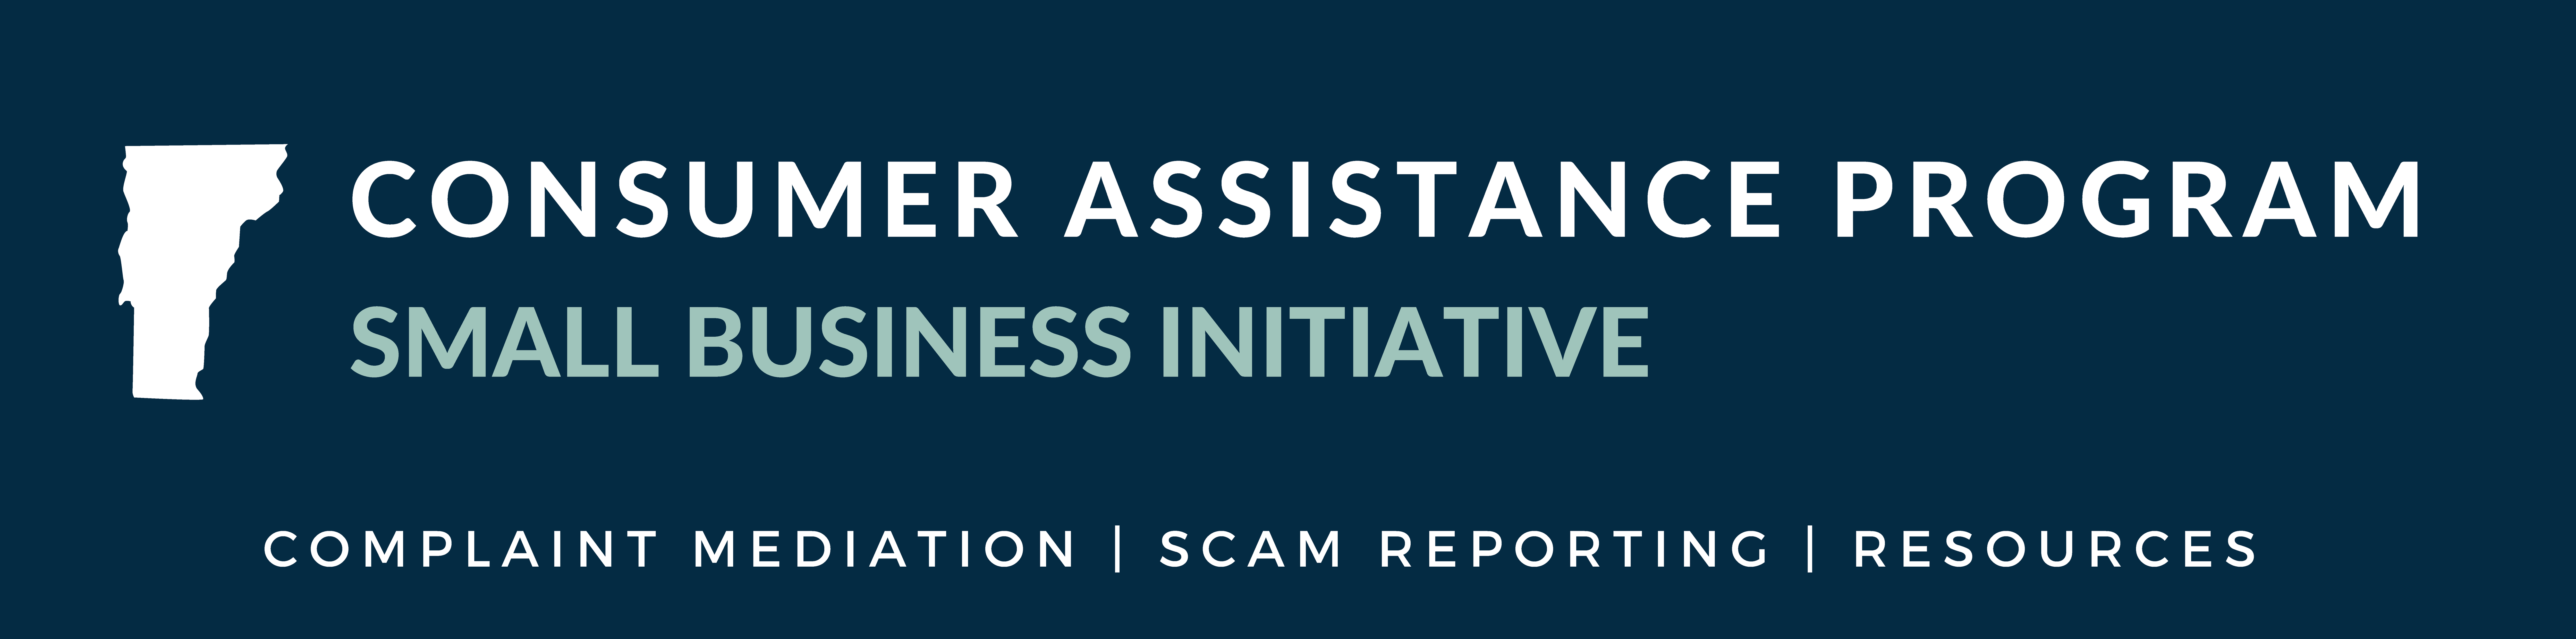 "Consumer Assistance Program, Small Business Initiative. Complaint Mediation, Scam Reporting, Resources"